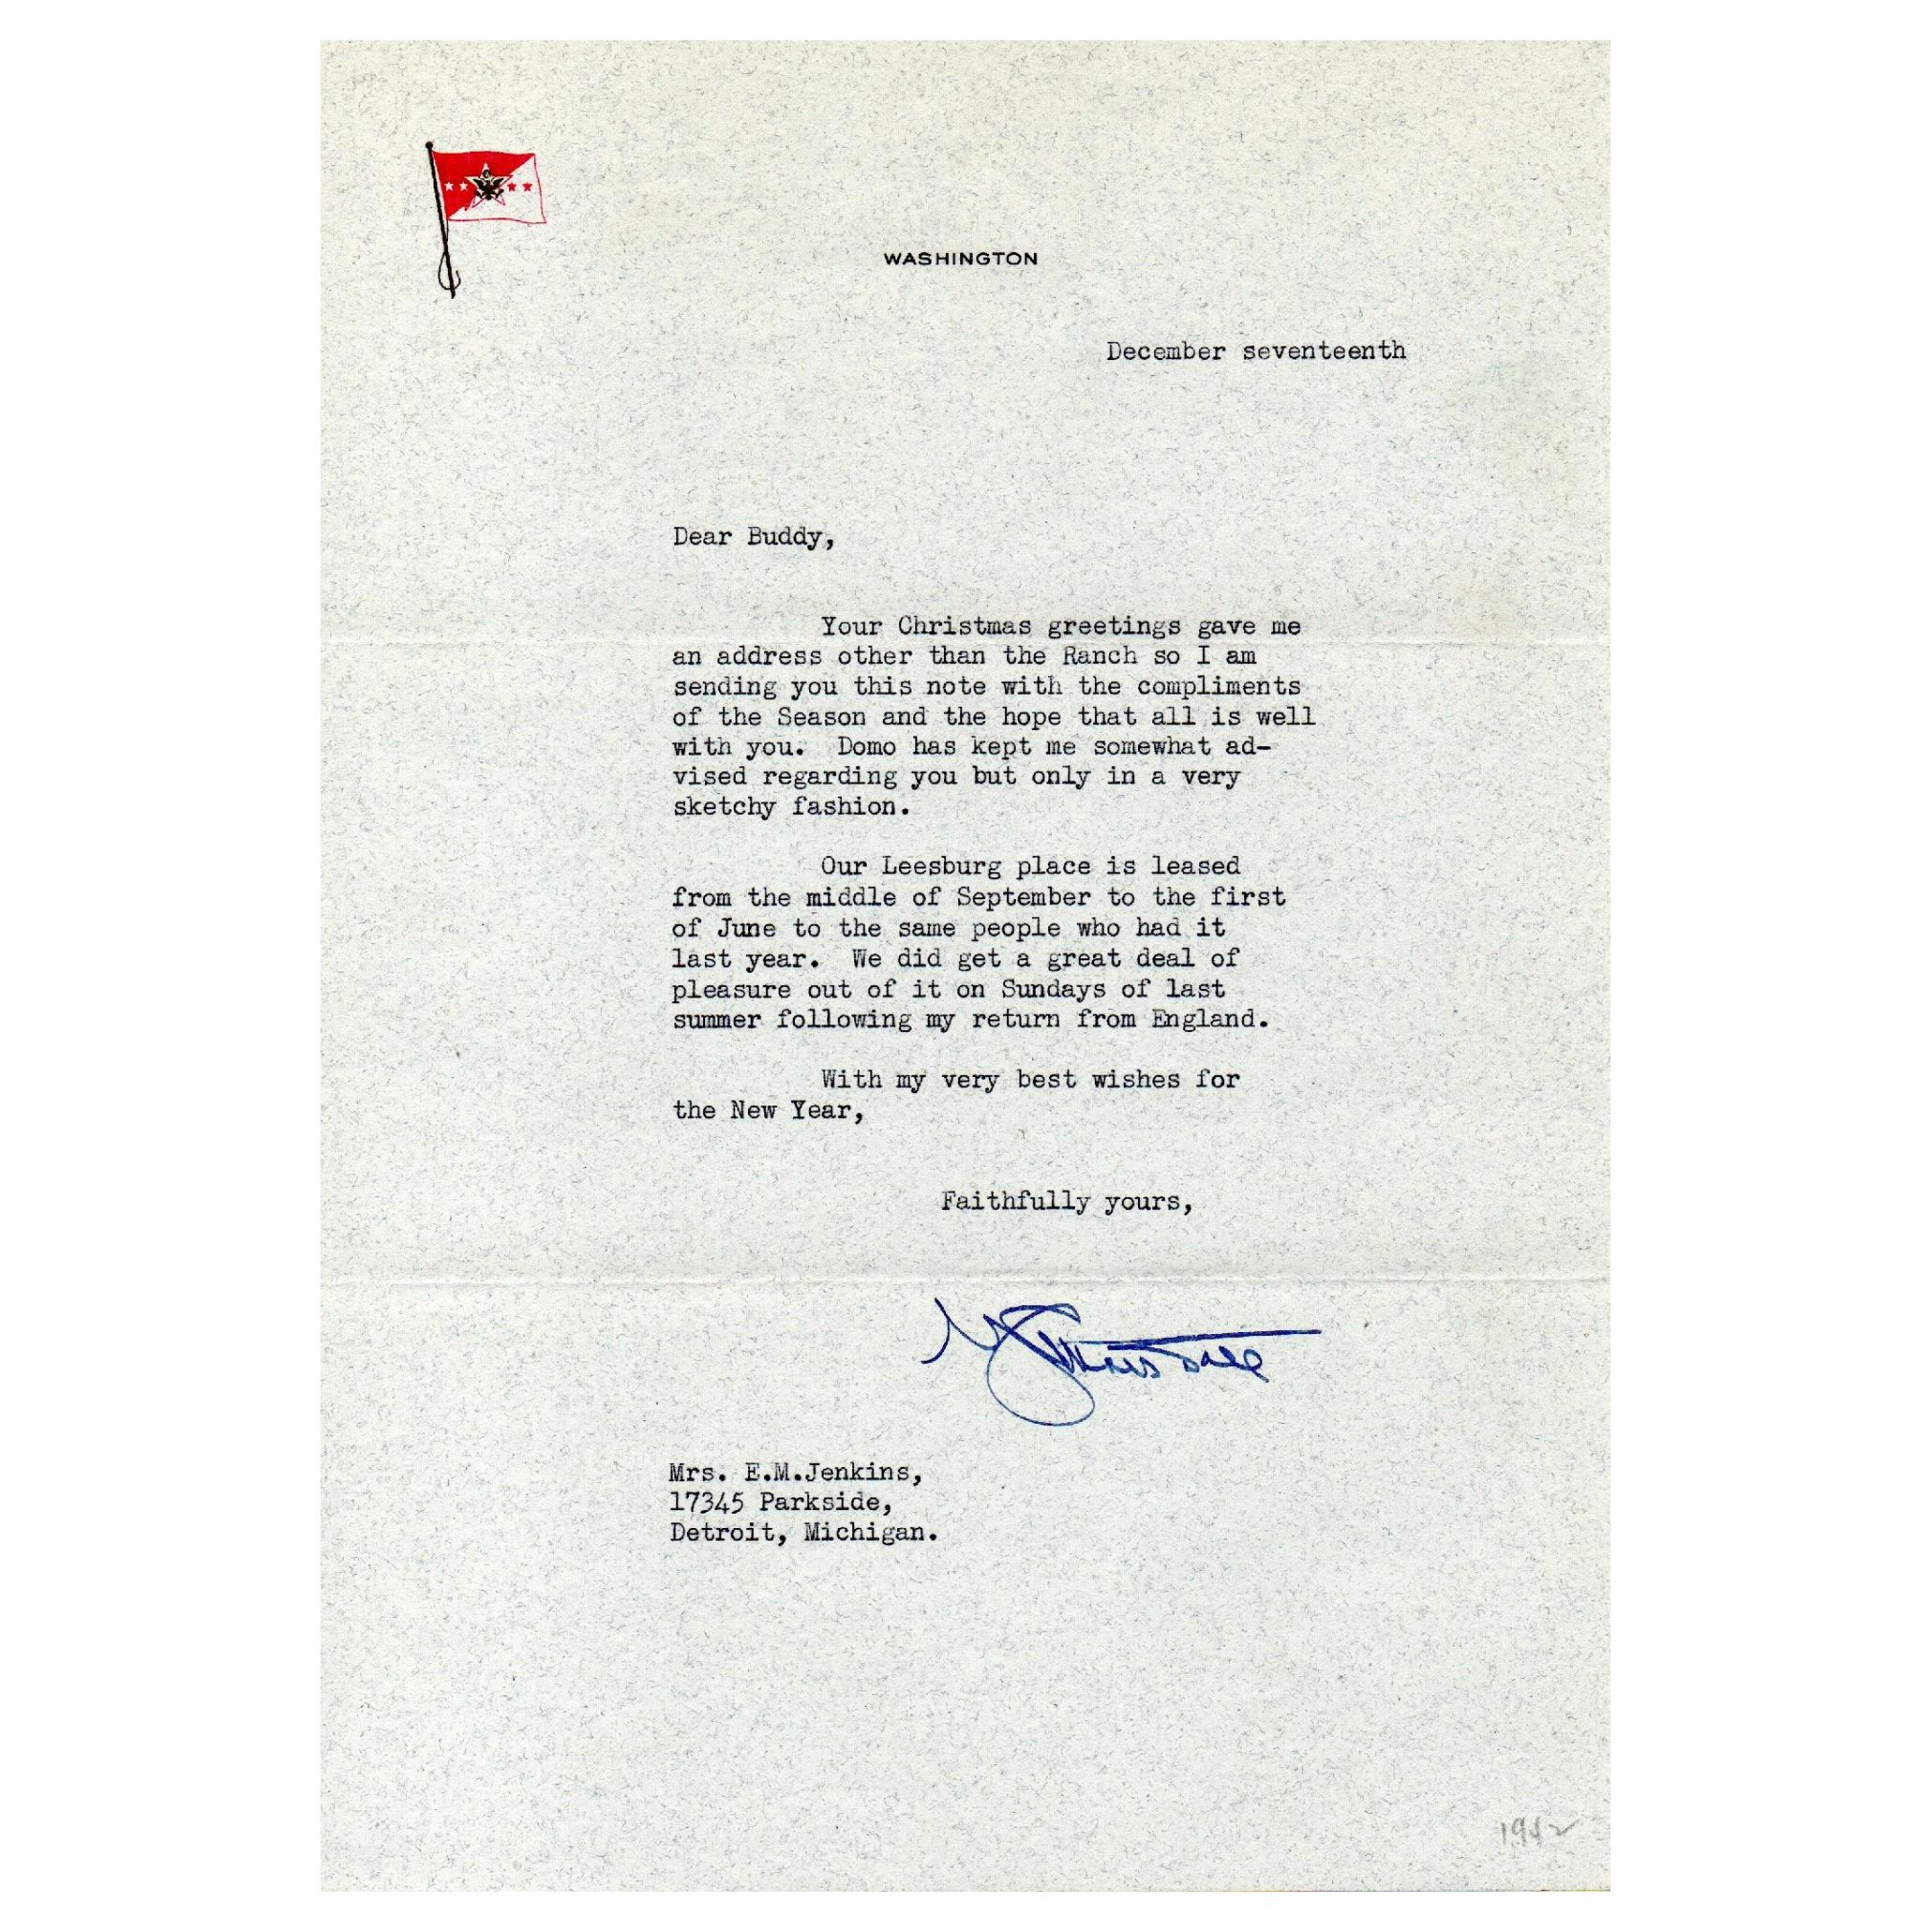 George C. Marshall War Dated and Signed Letter to E. M. Jenkins, 1942